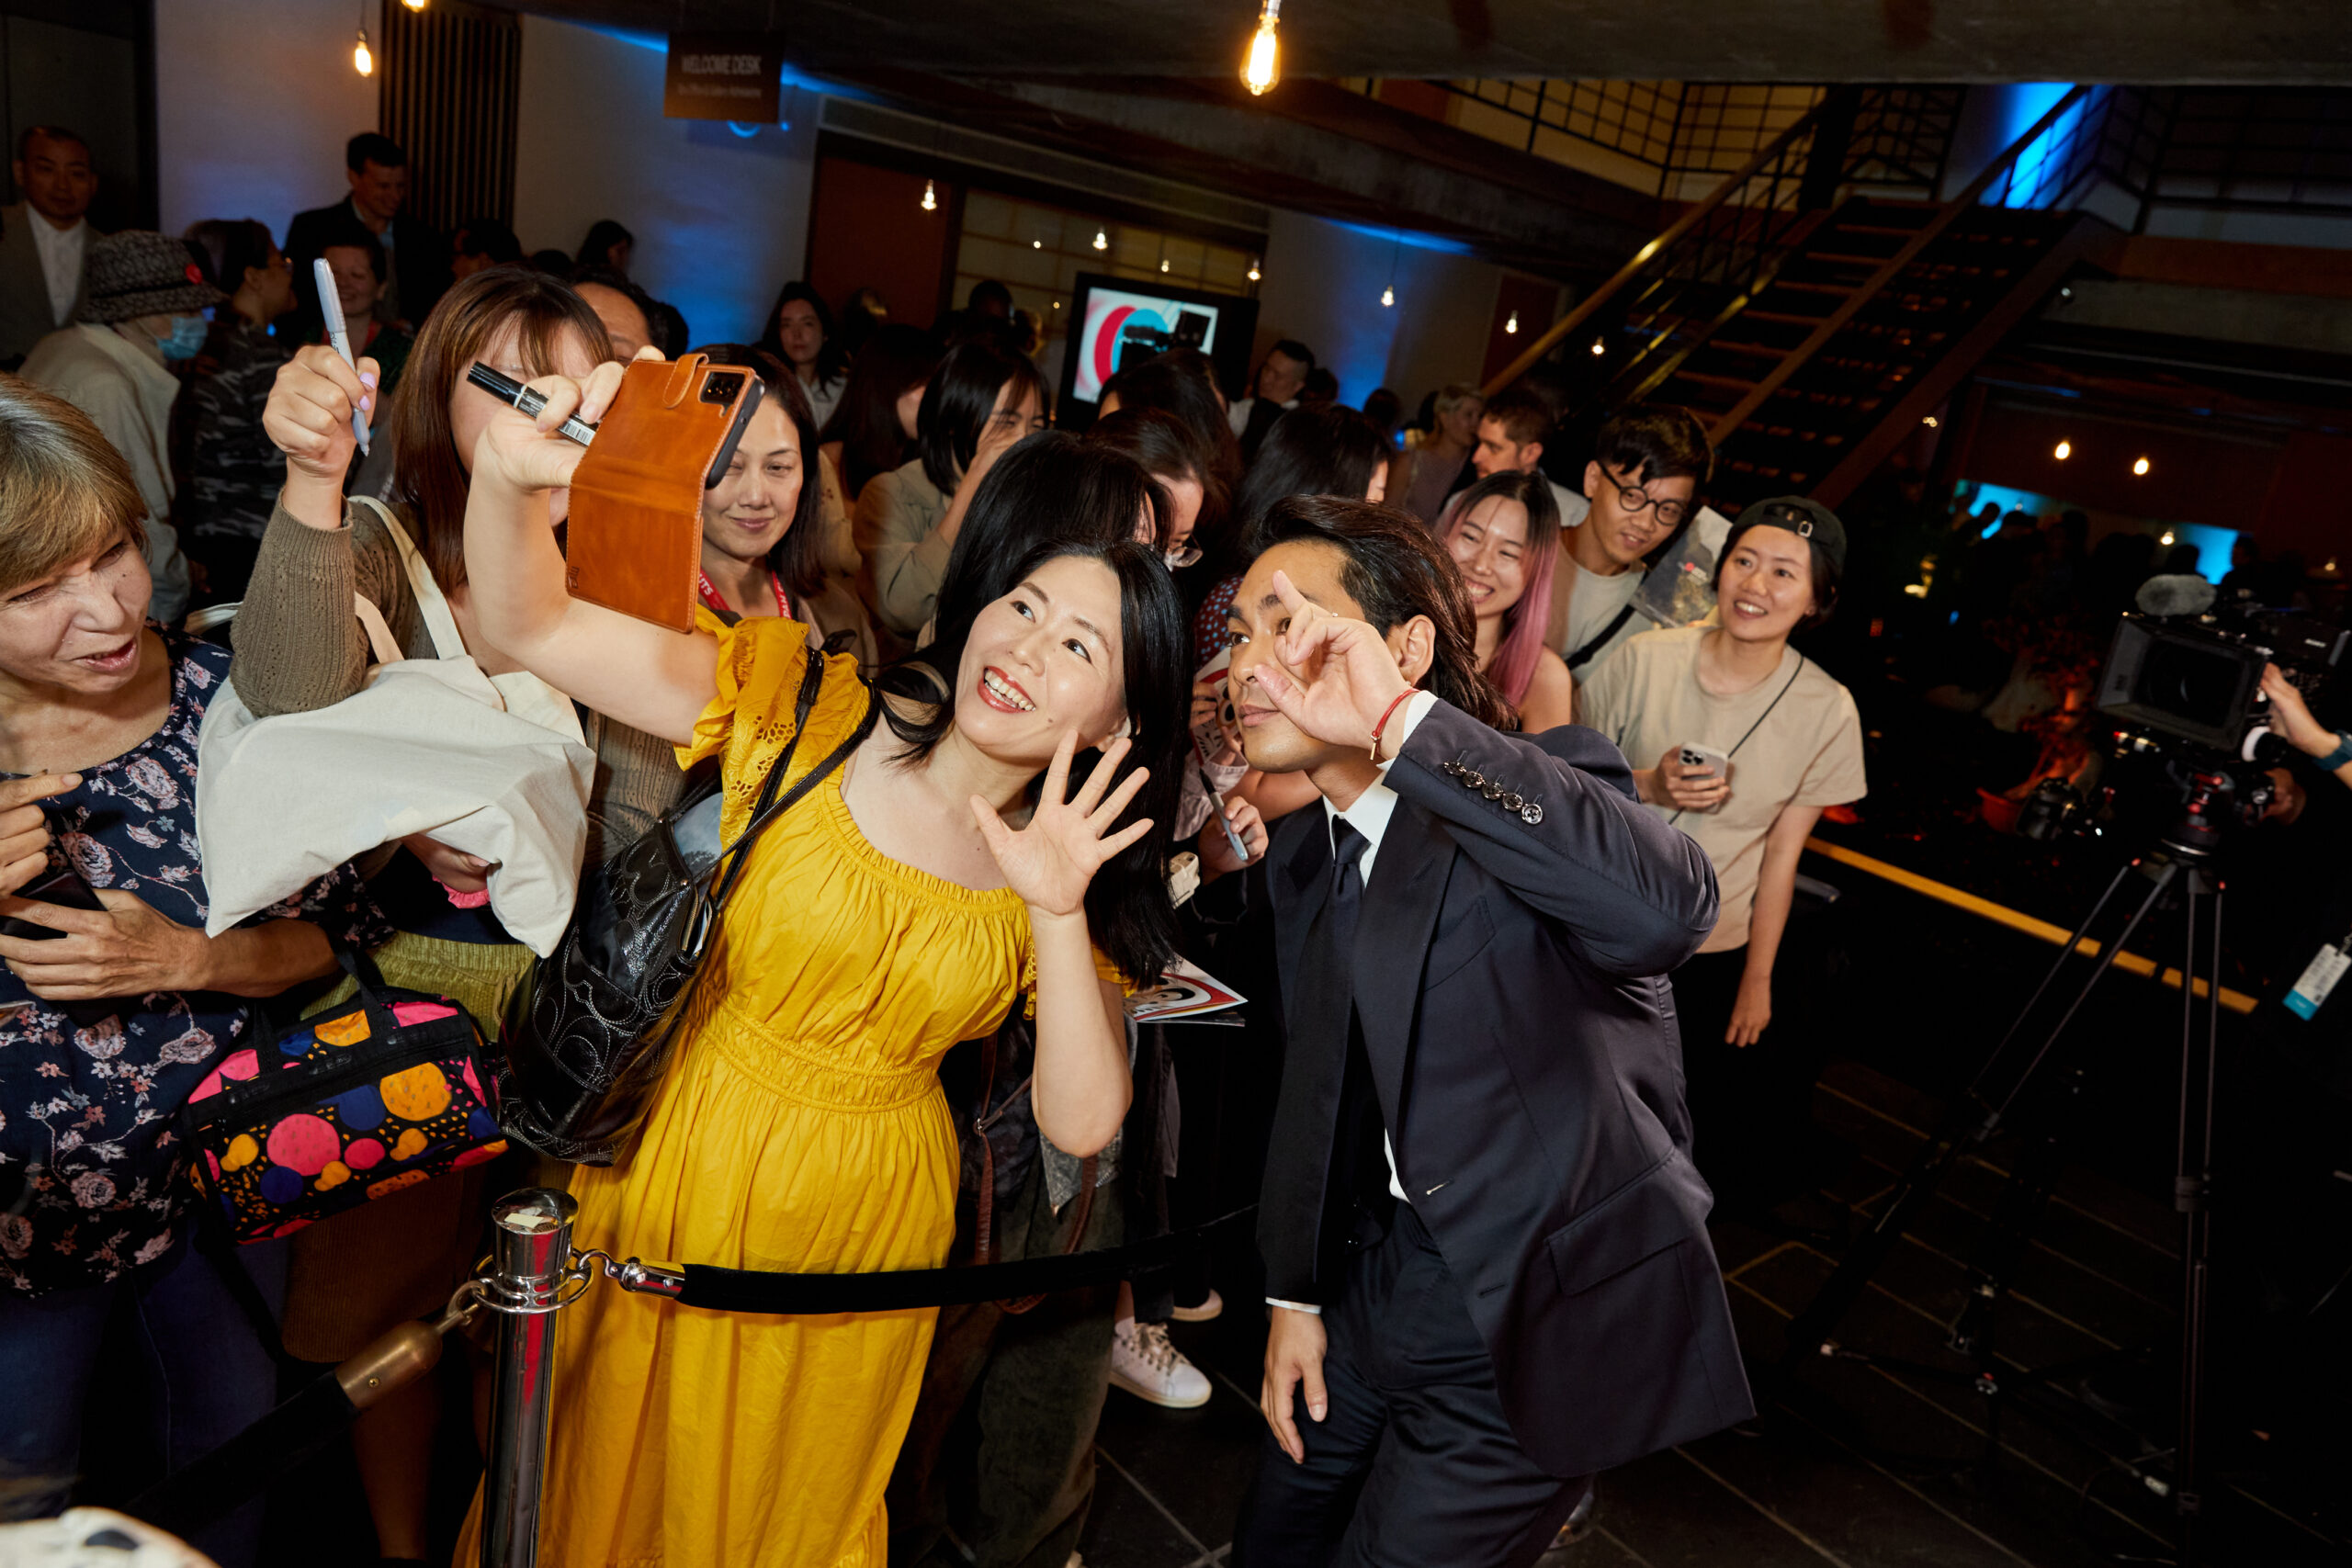 'Under the Turquoise Sky' lead actor Yuya Yagira at 2023 Japan Cuts Film Festival. Photo Credit: Daphne Youree